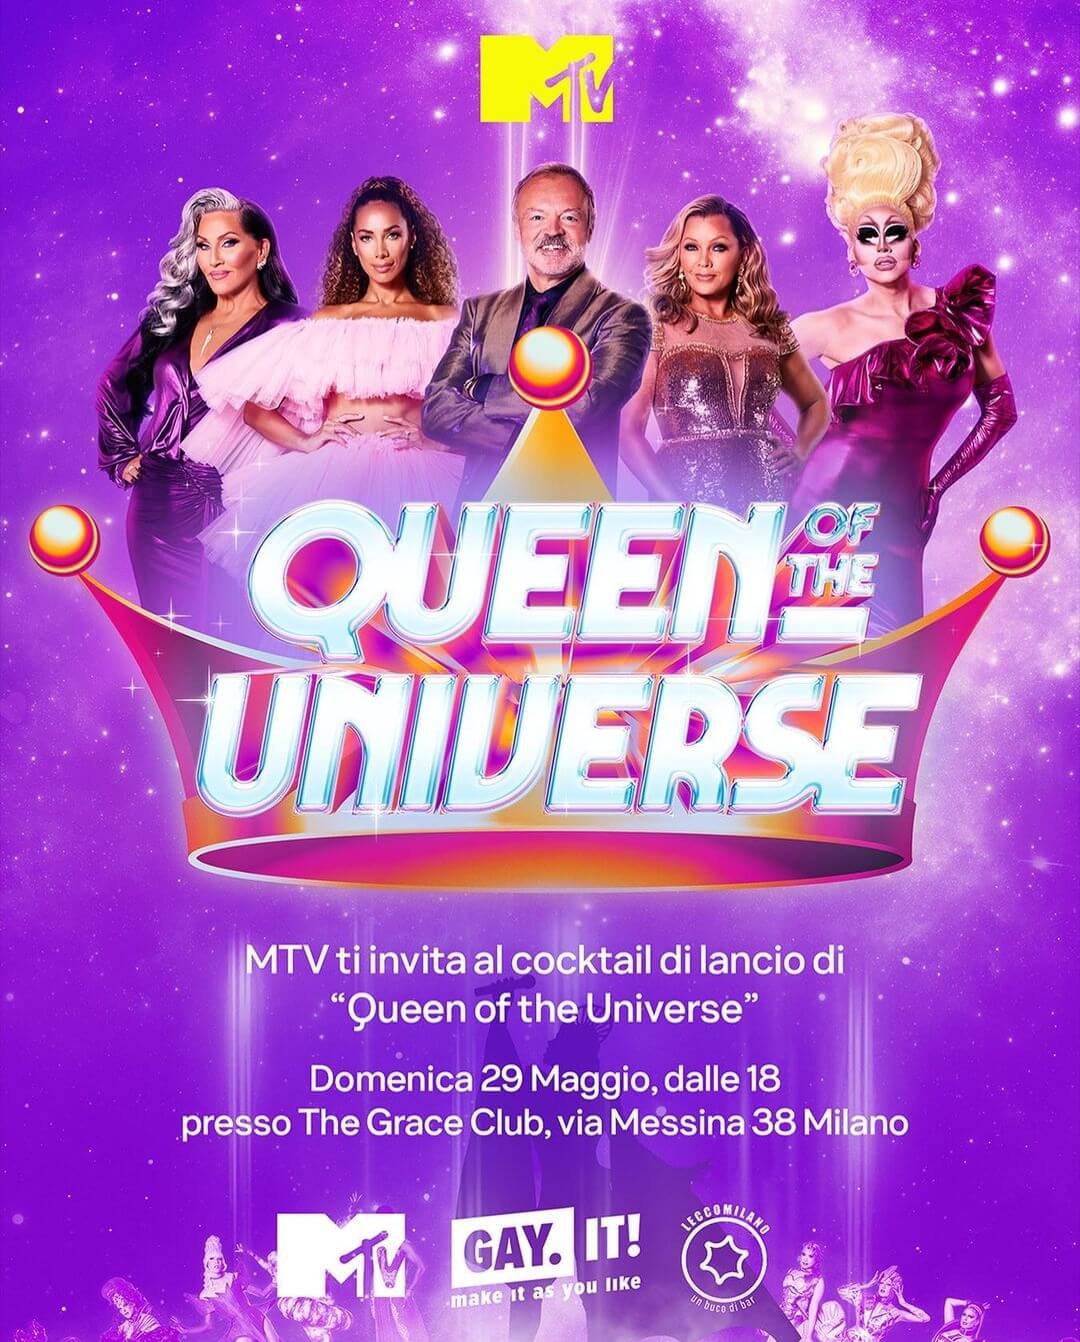 Arriva in Italia Queen of the Universe, lo spin-off di RuPaul’s Drag Race - Screenshot 2022 05 28 15 59 40 06 - Gay.it